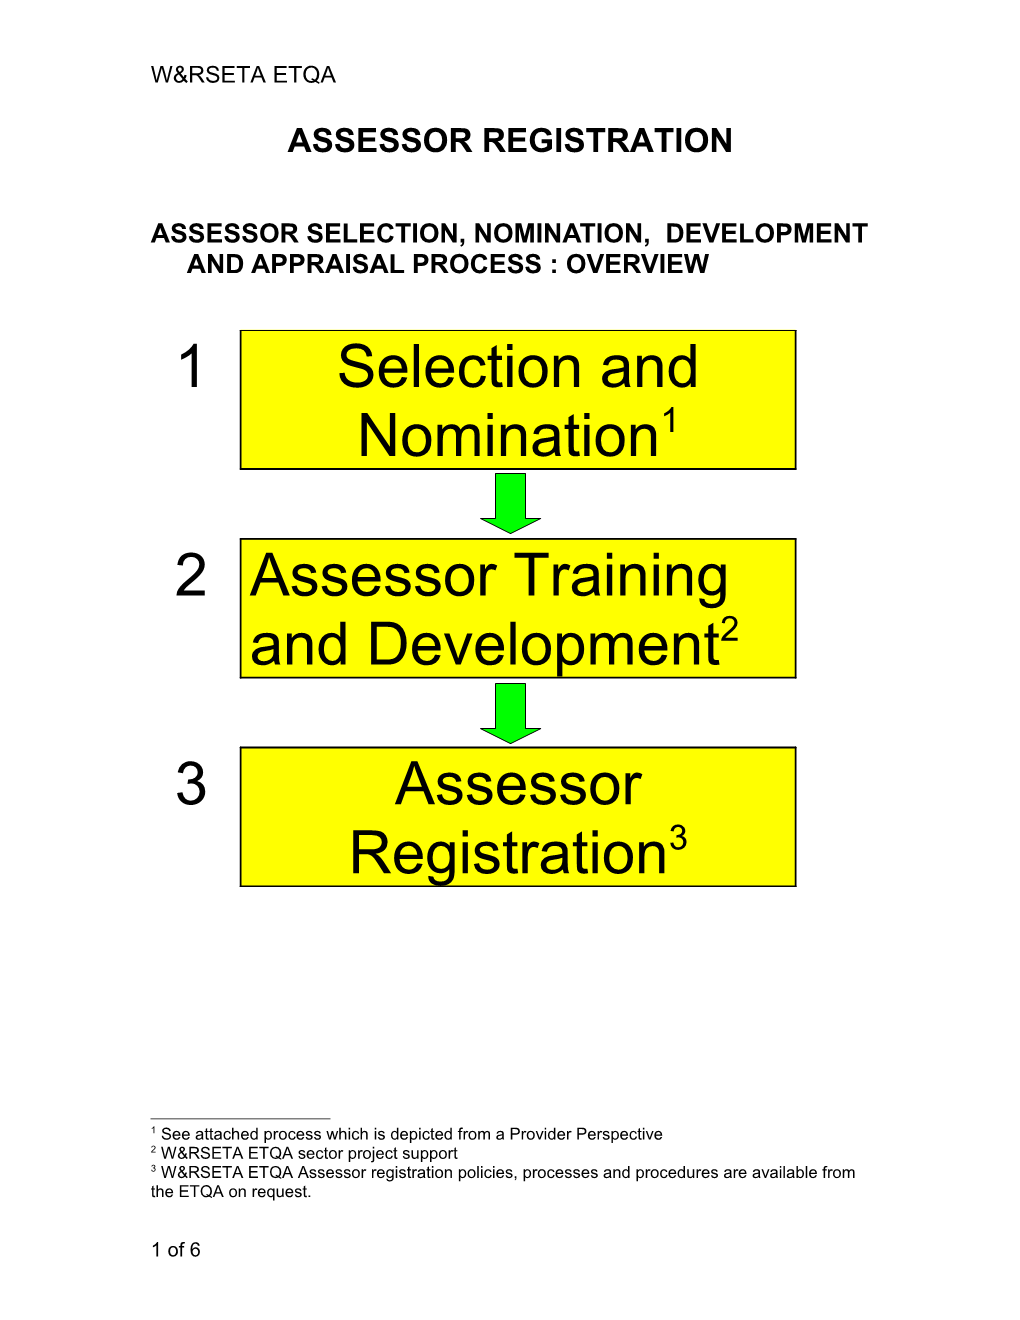 Assessor Selection, Nomination, Development and Appraisal Process : Overview